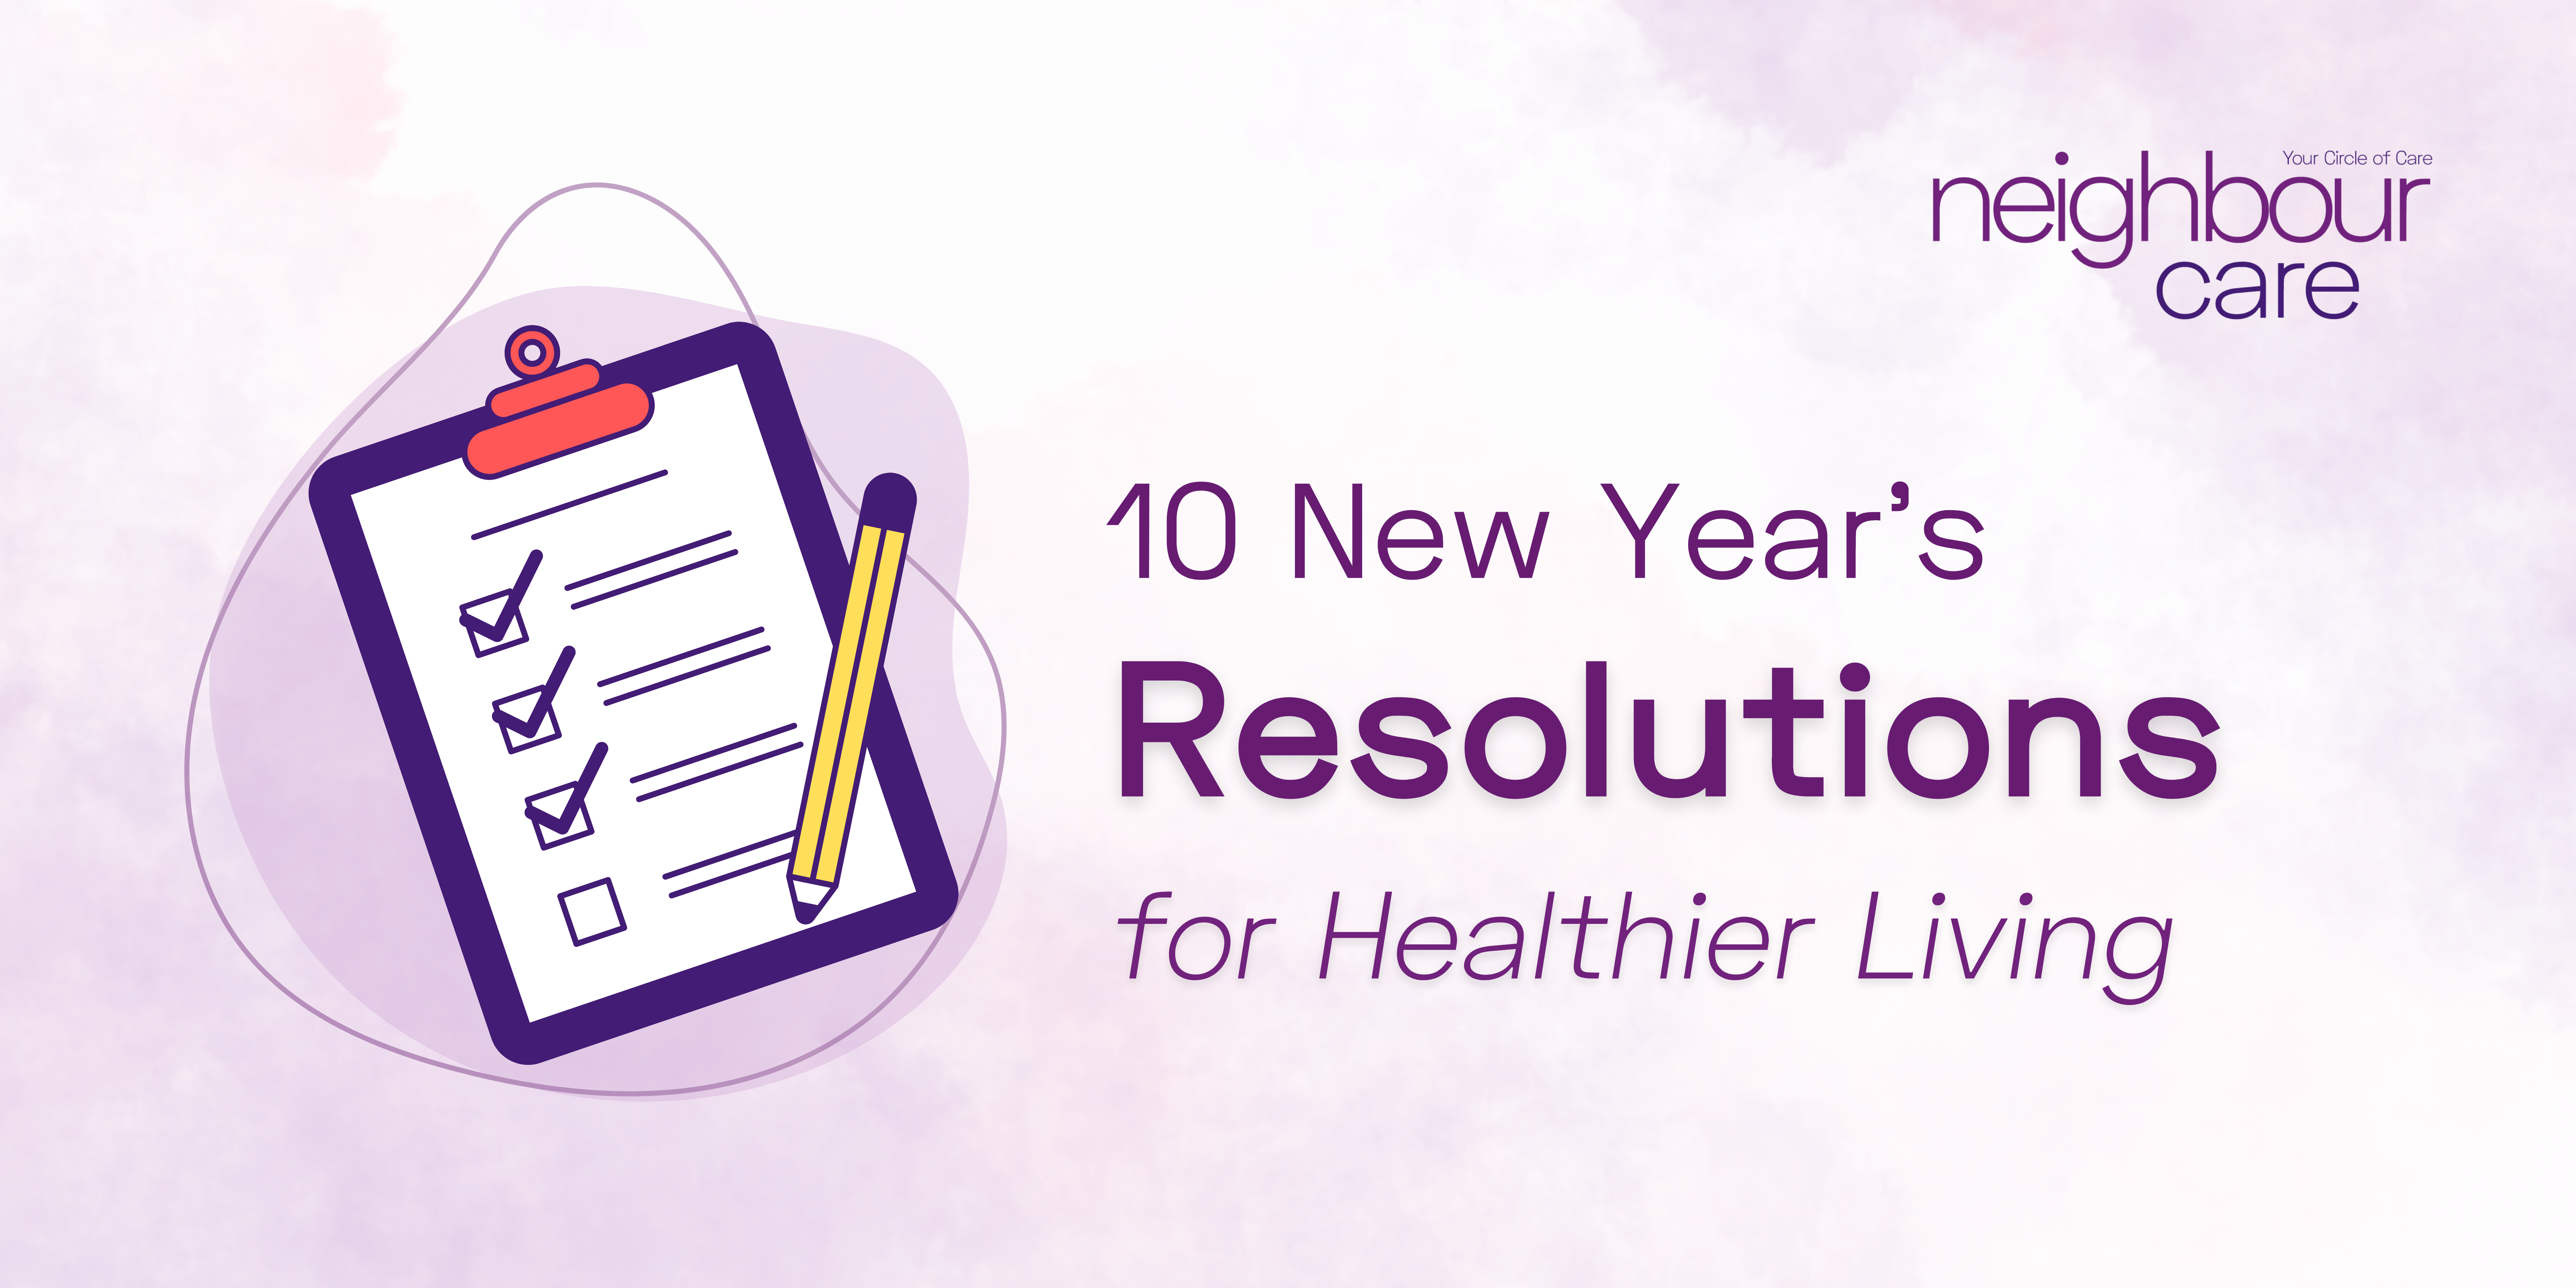 10 New Year's Resolutions for Healthier Living